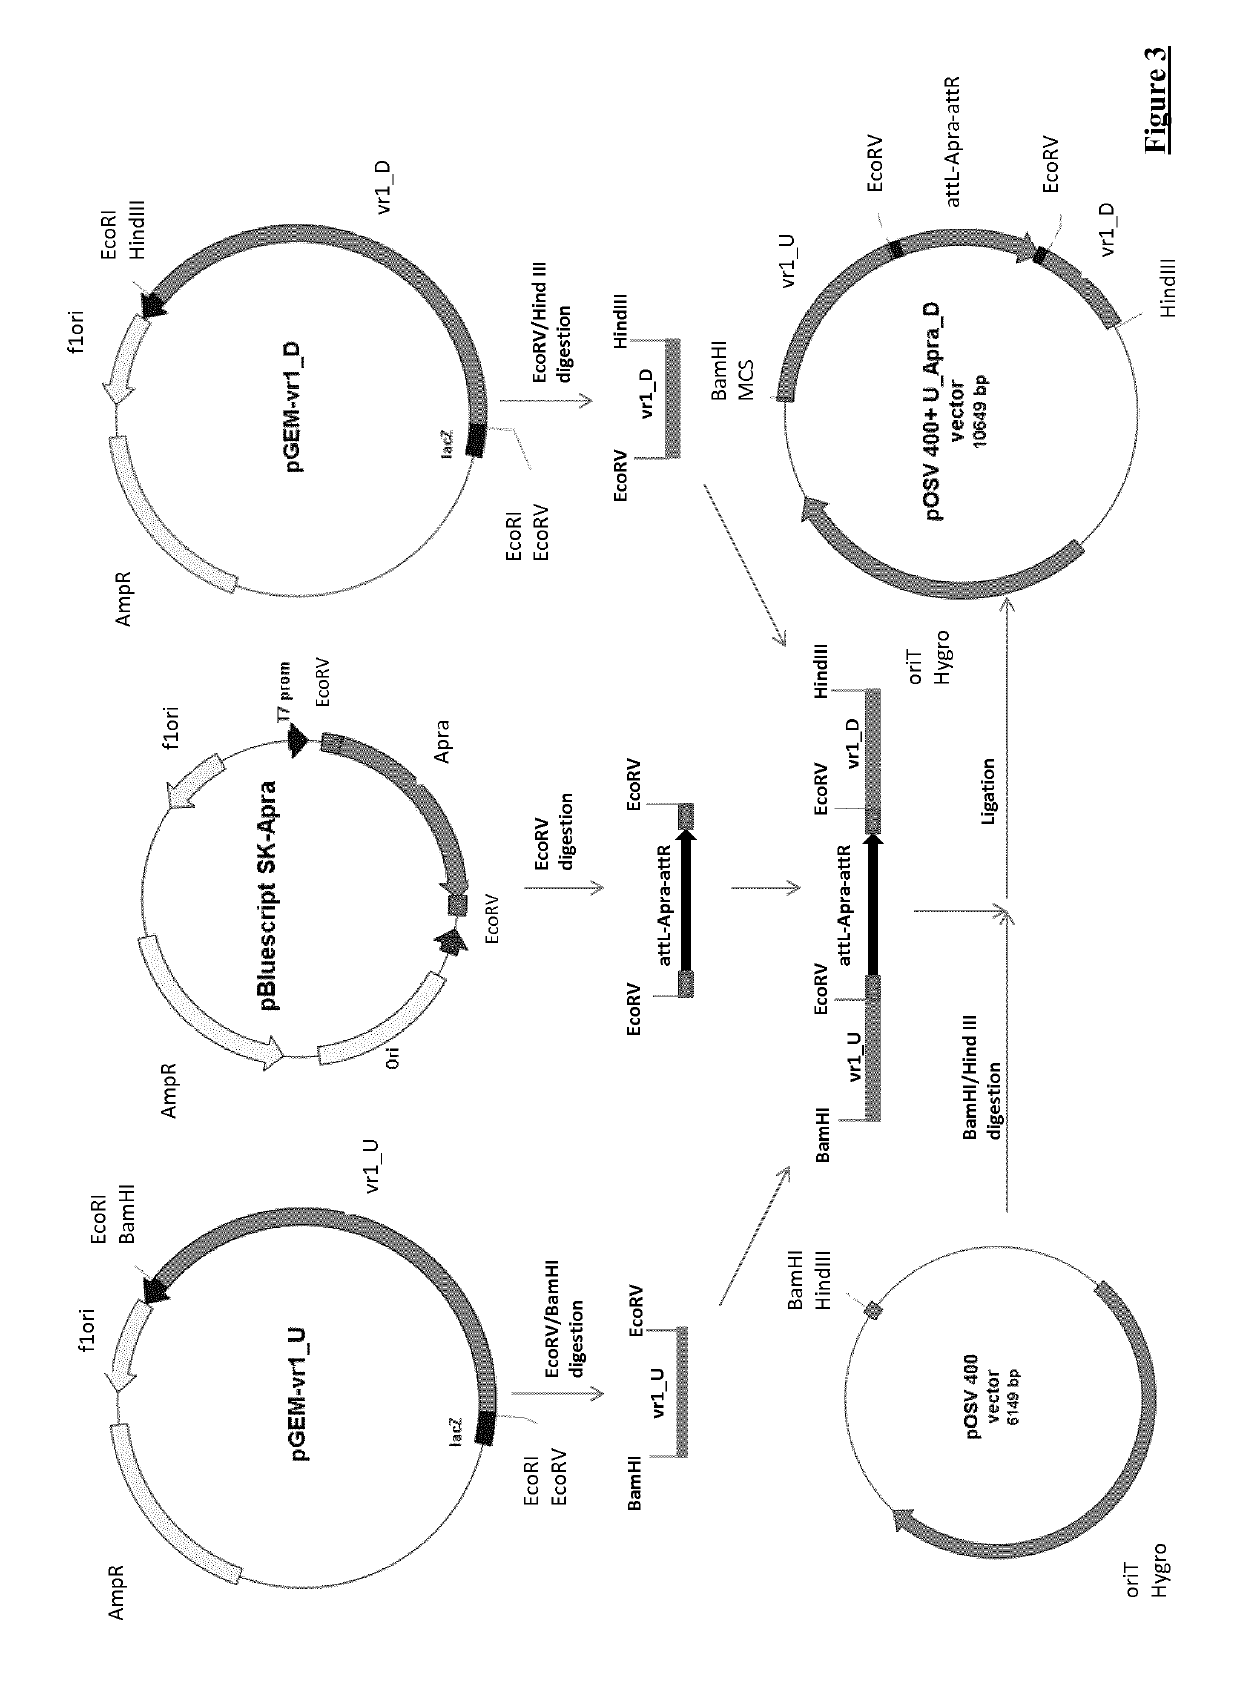 Microorganisms and methods for producing vanillin